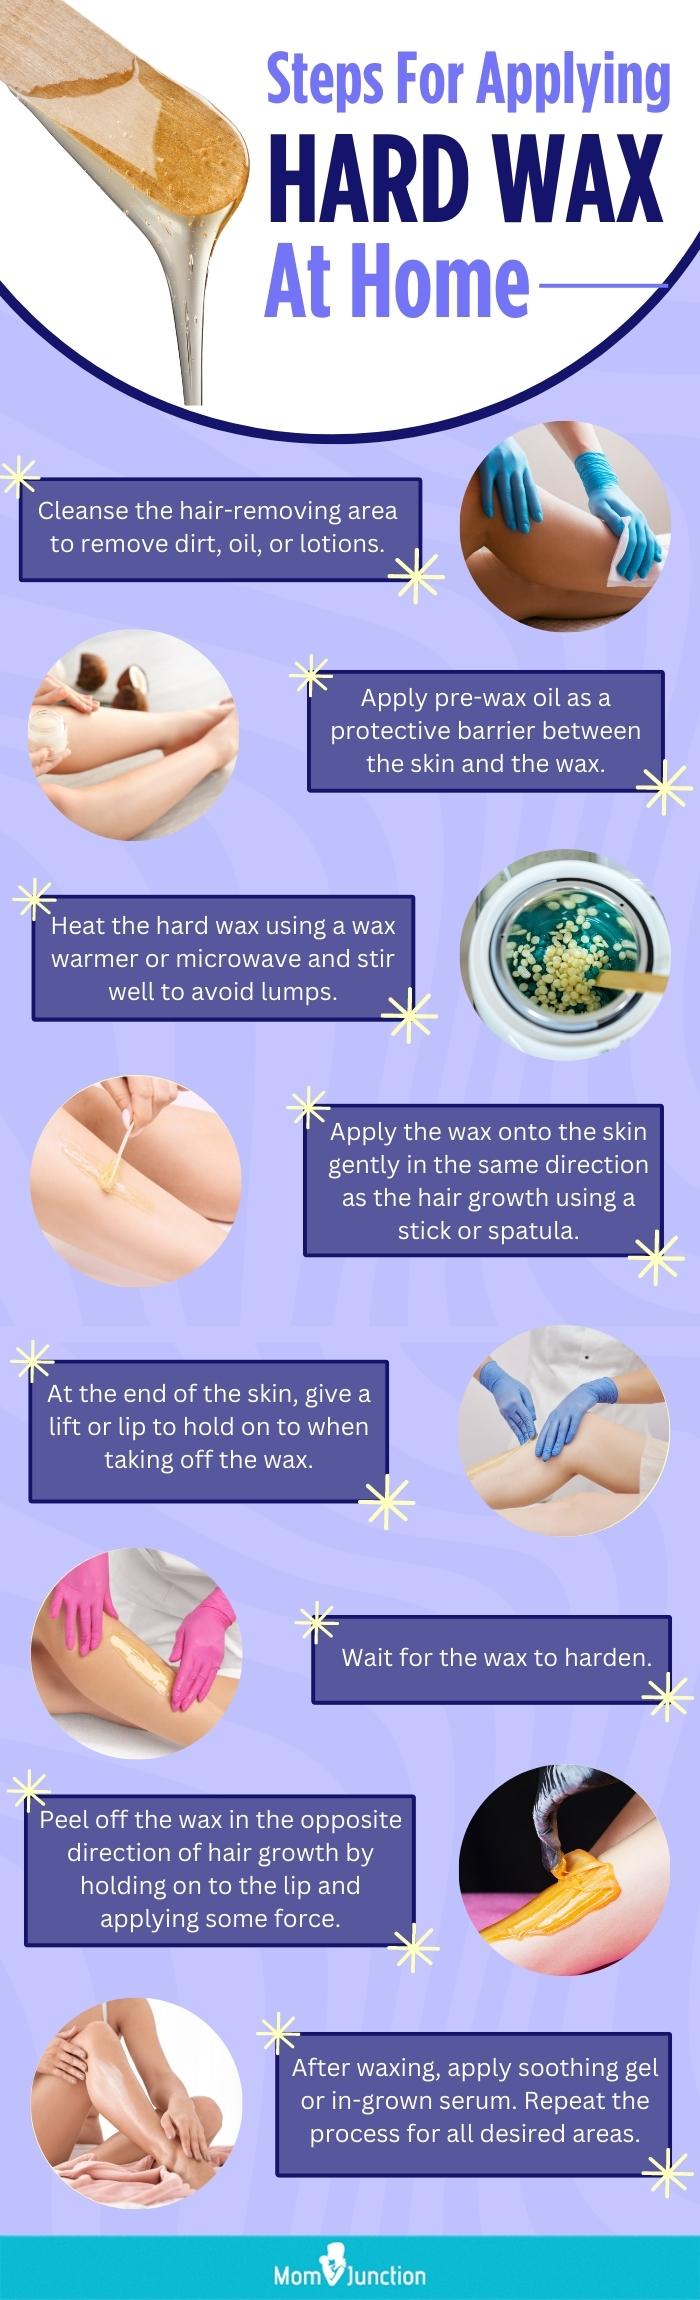 How to Wax Step by Step